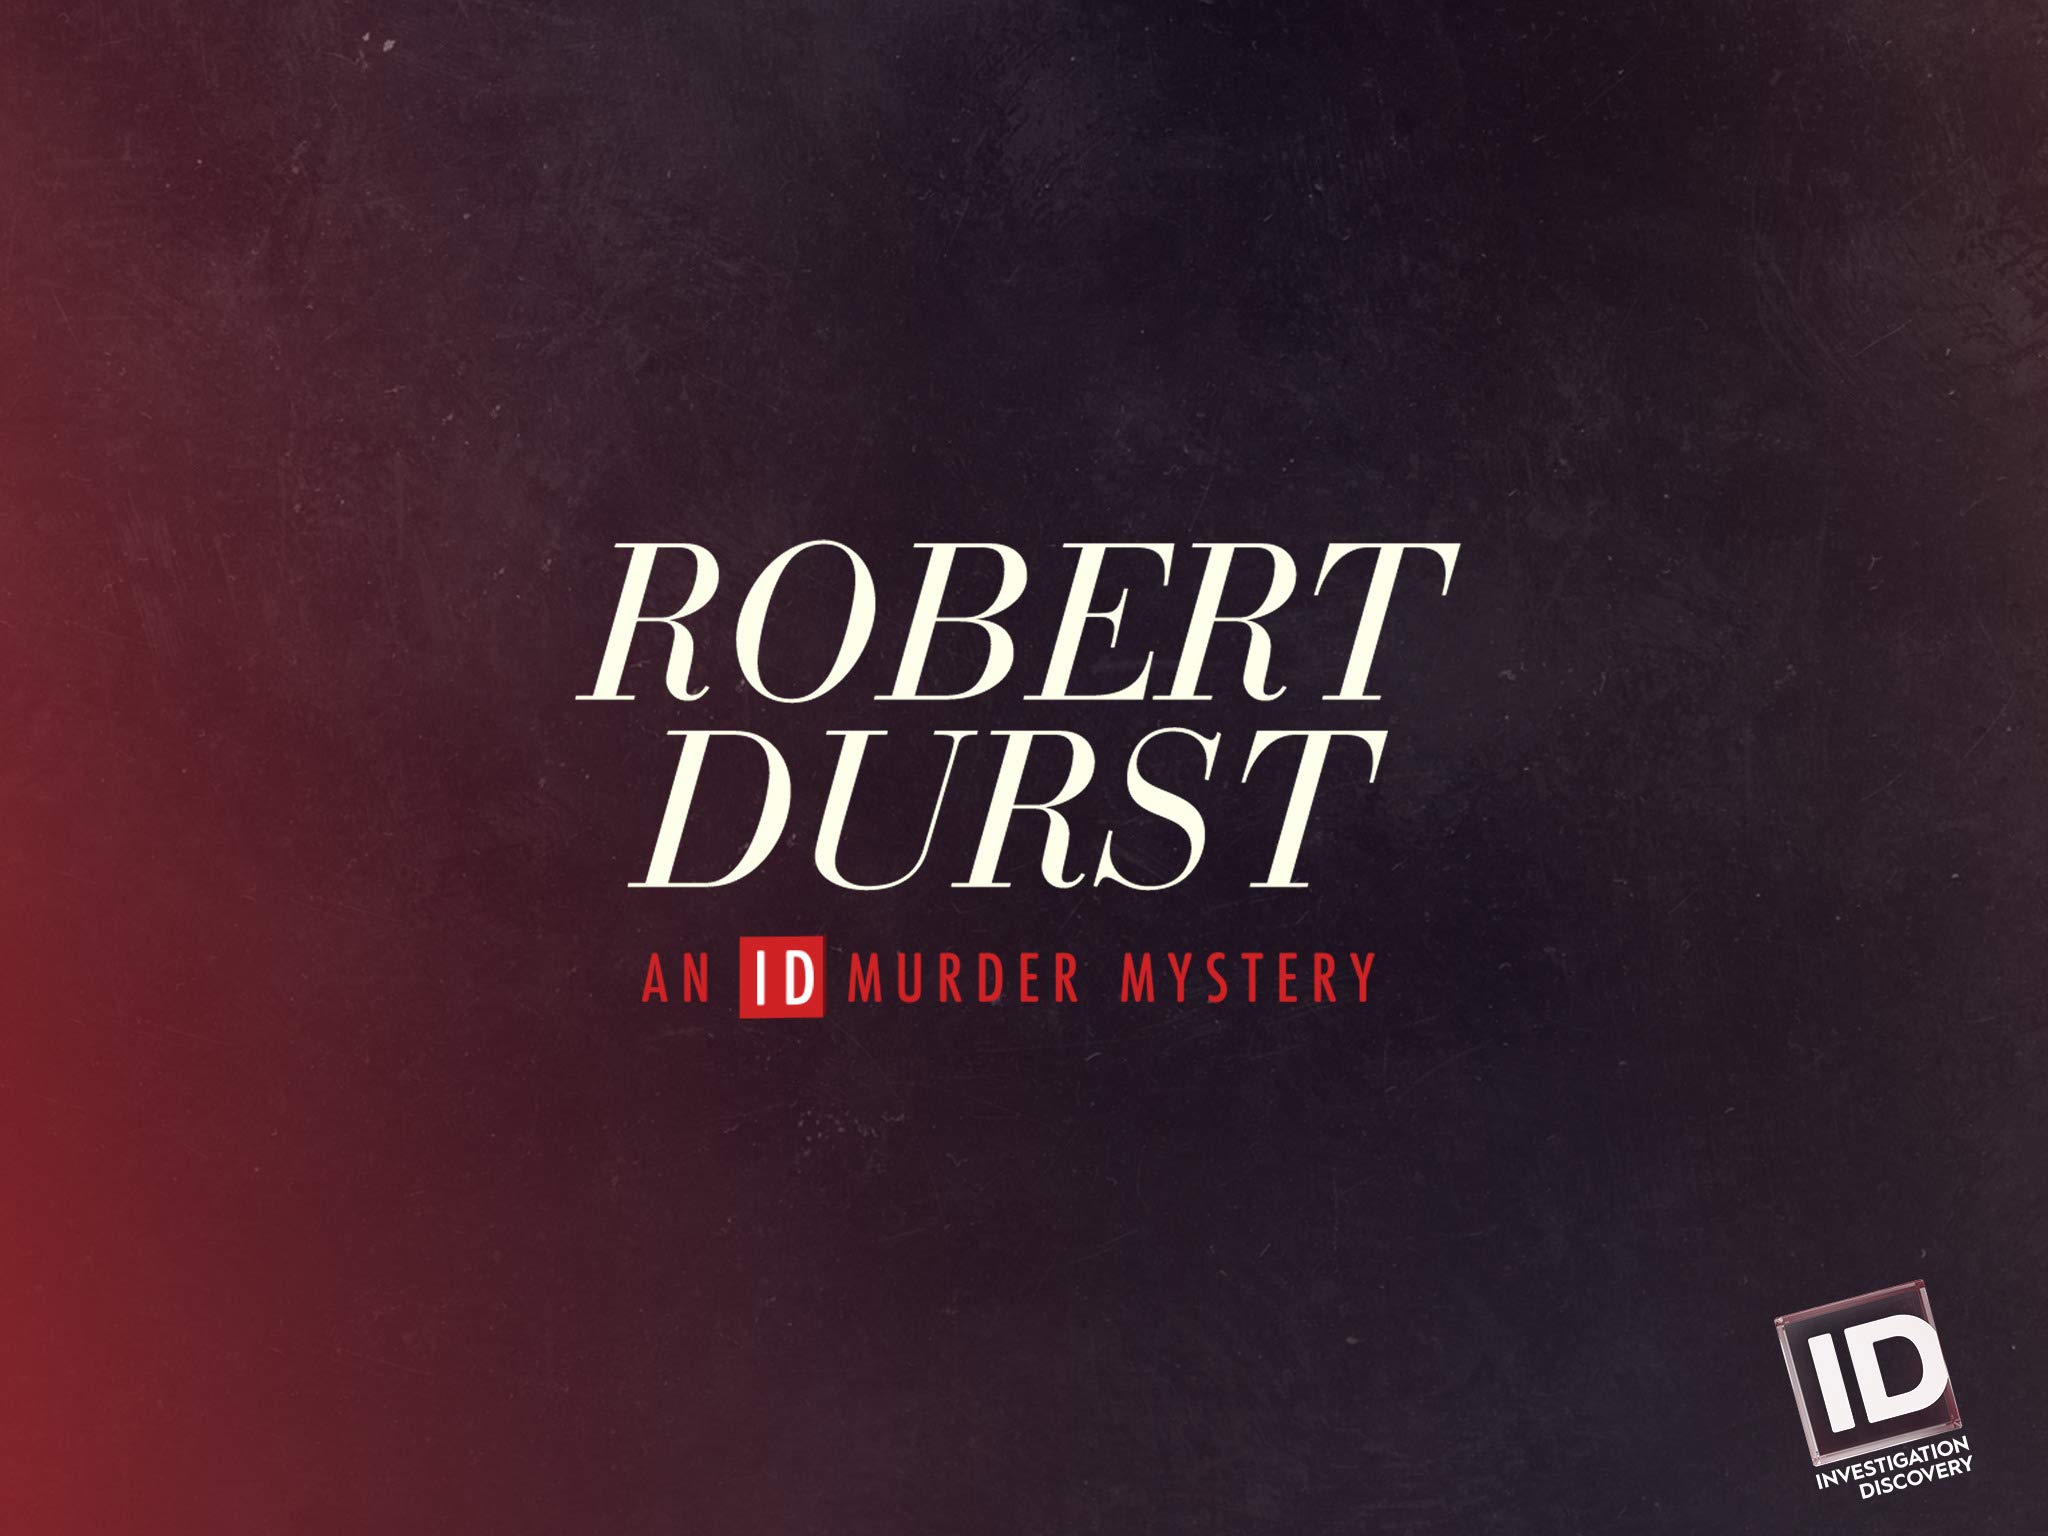 TV ratings for Robert Durst: An Id Murder Mystery in Japan. investigation discovery TV series